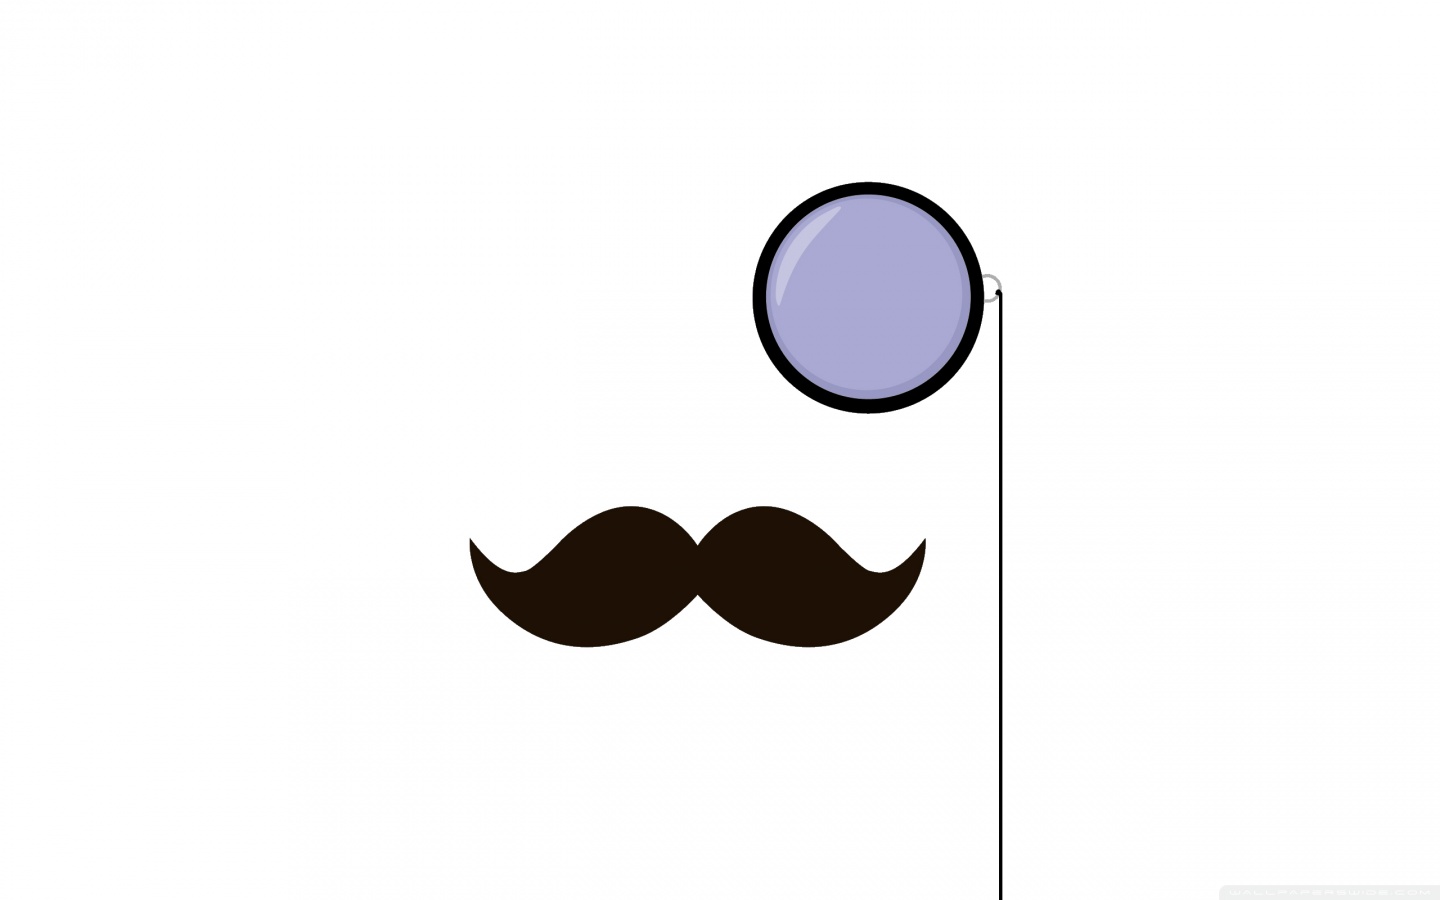 Monocle clipart #2, Download drawings